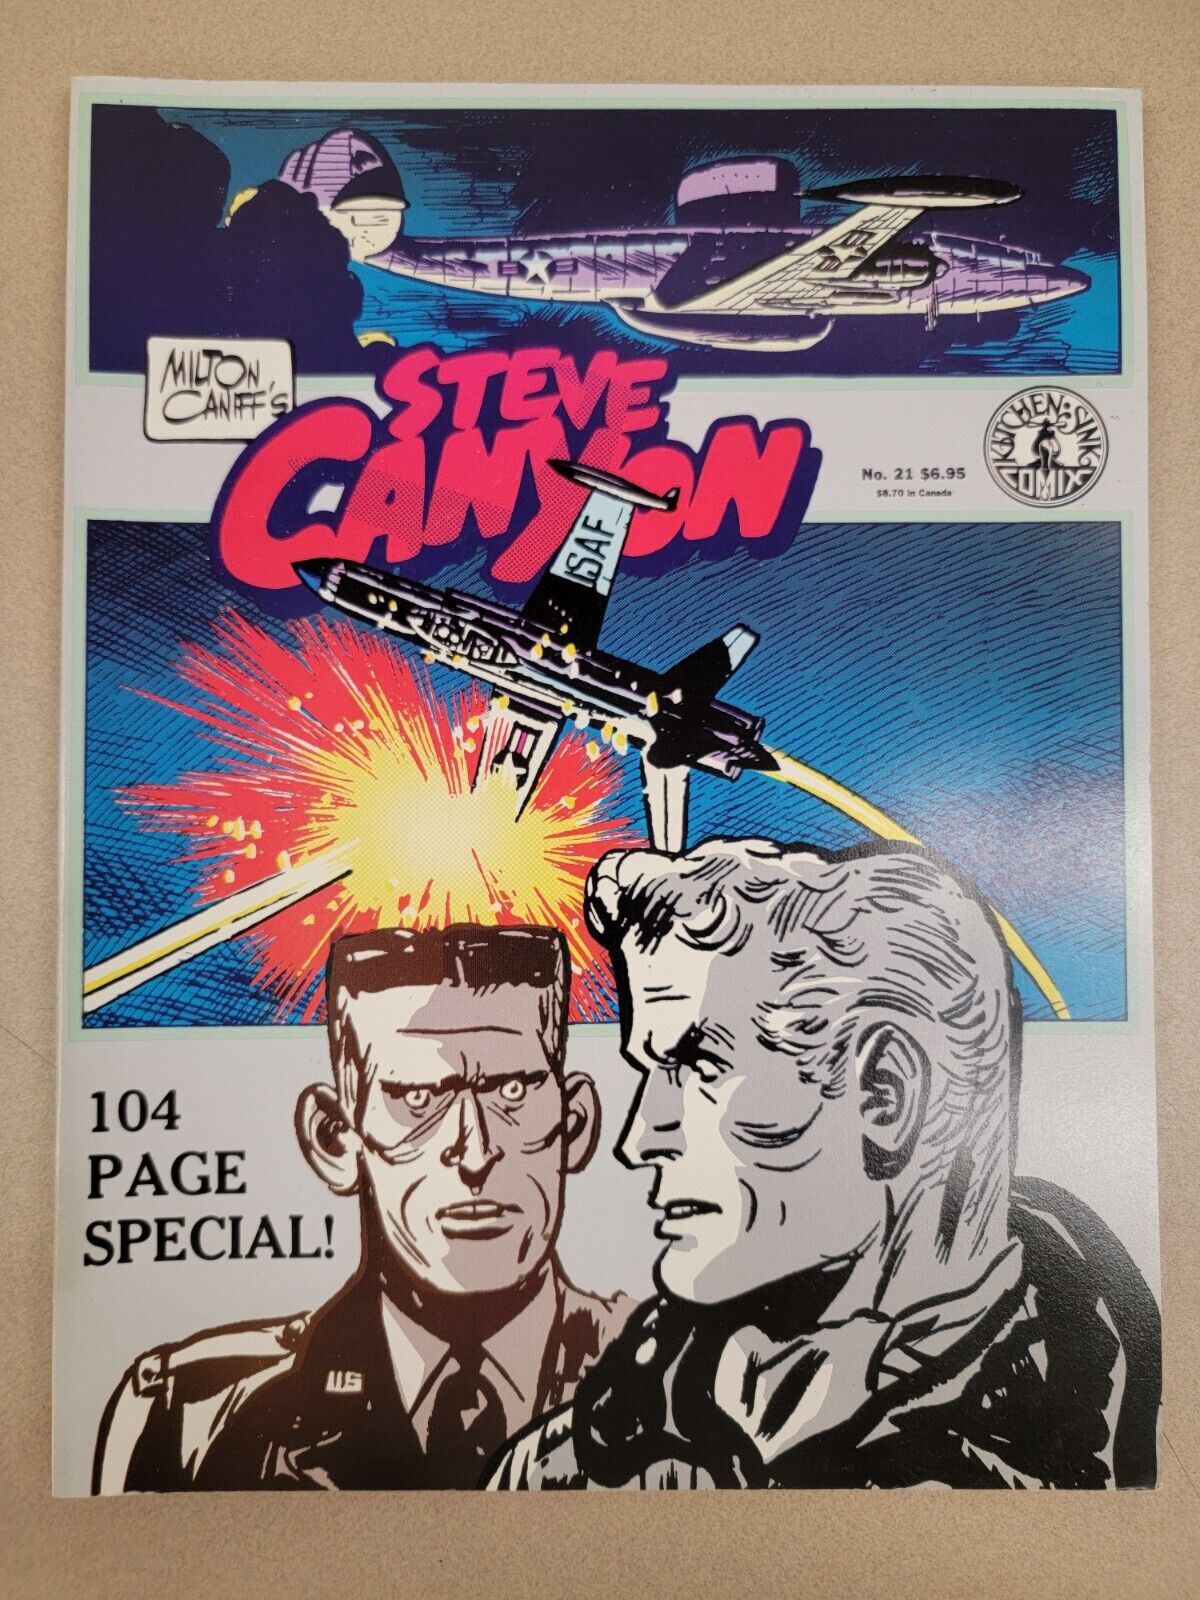 Milton Caniff\'s Steve Canyon # 21 December 1988 By Kitchen Sink Press Softcover